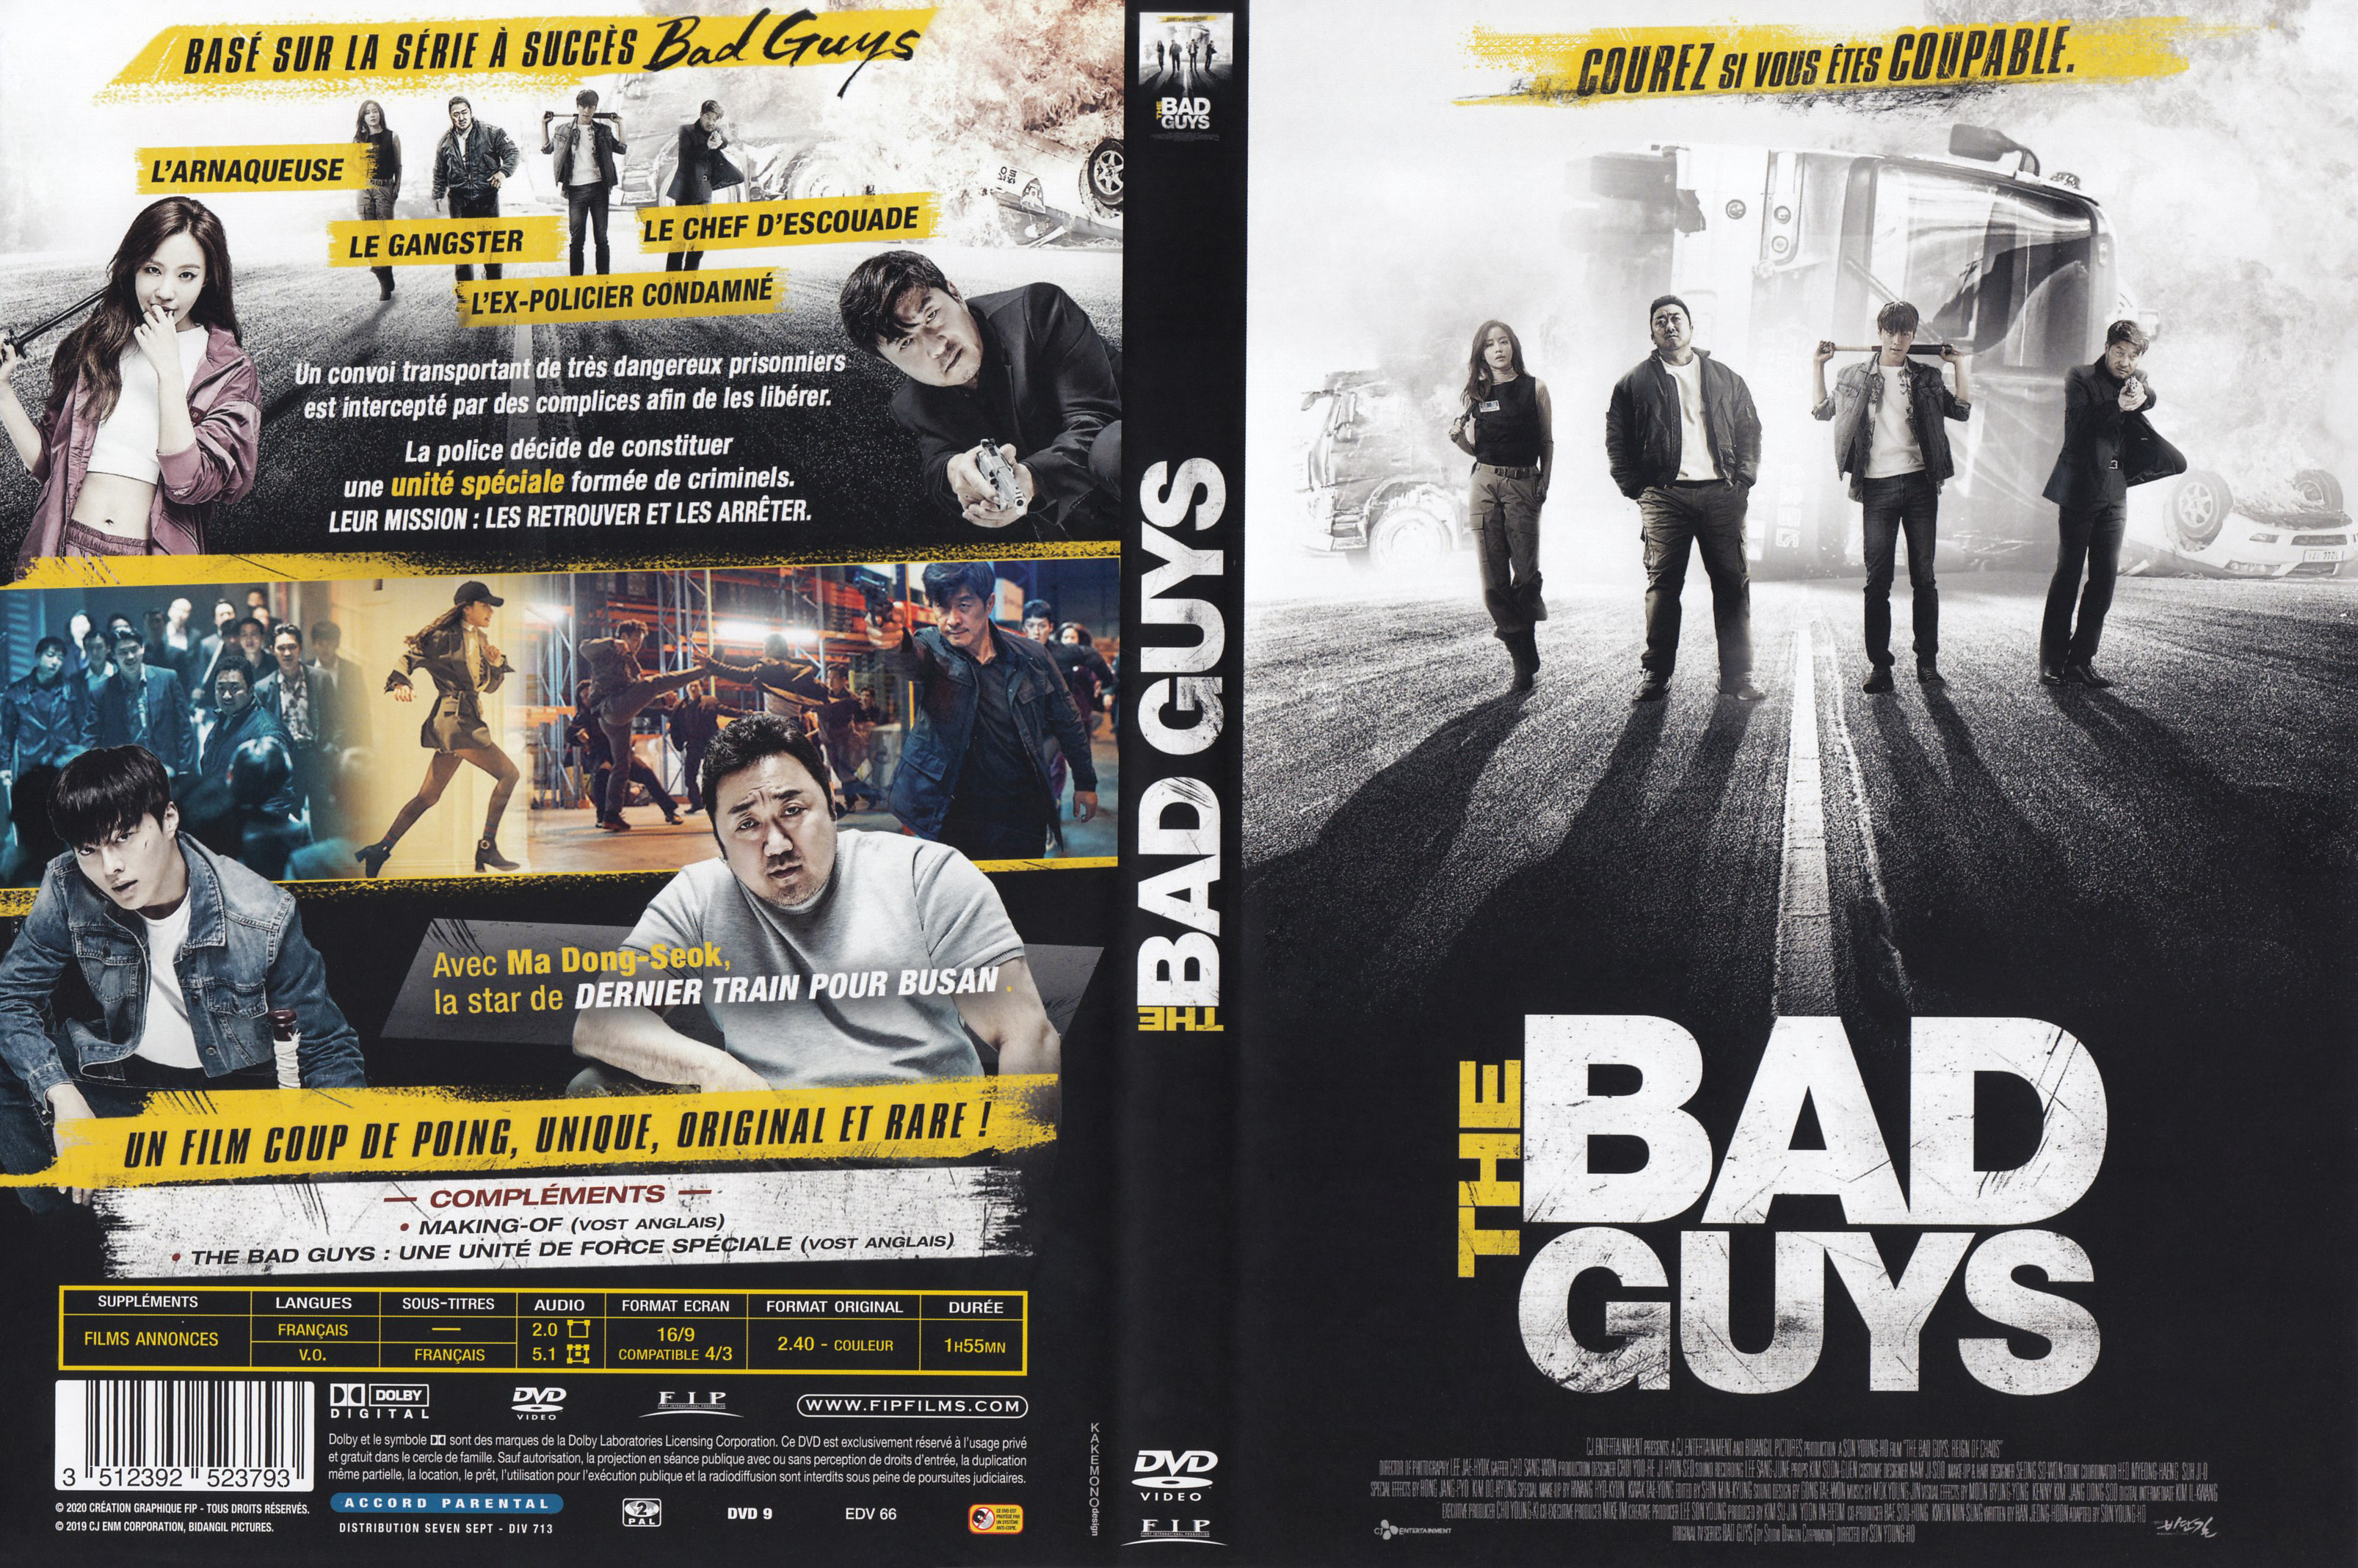 Jaquette DVD The bad guys